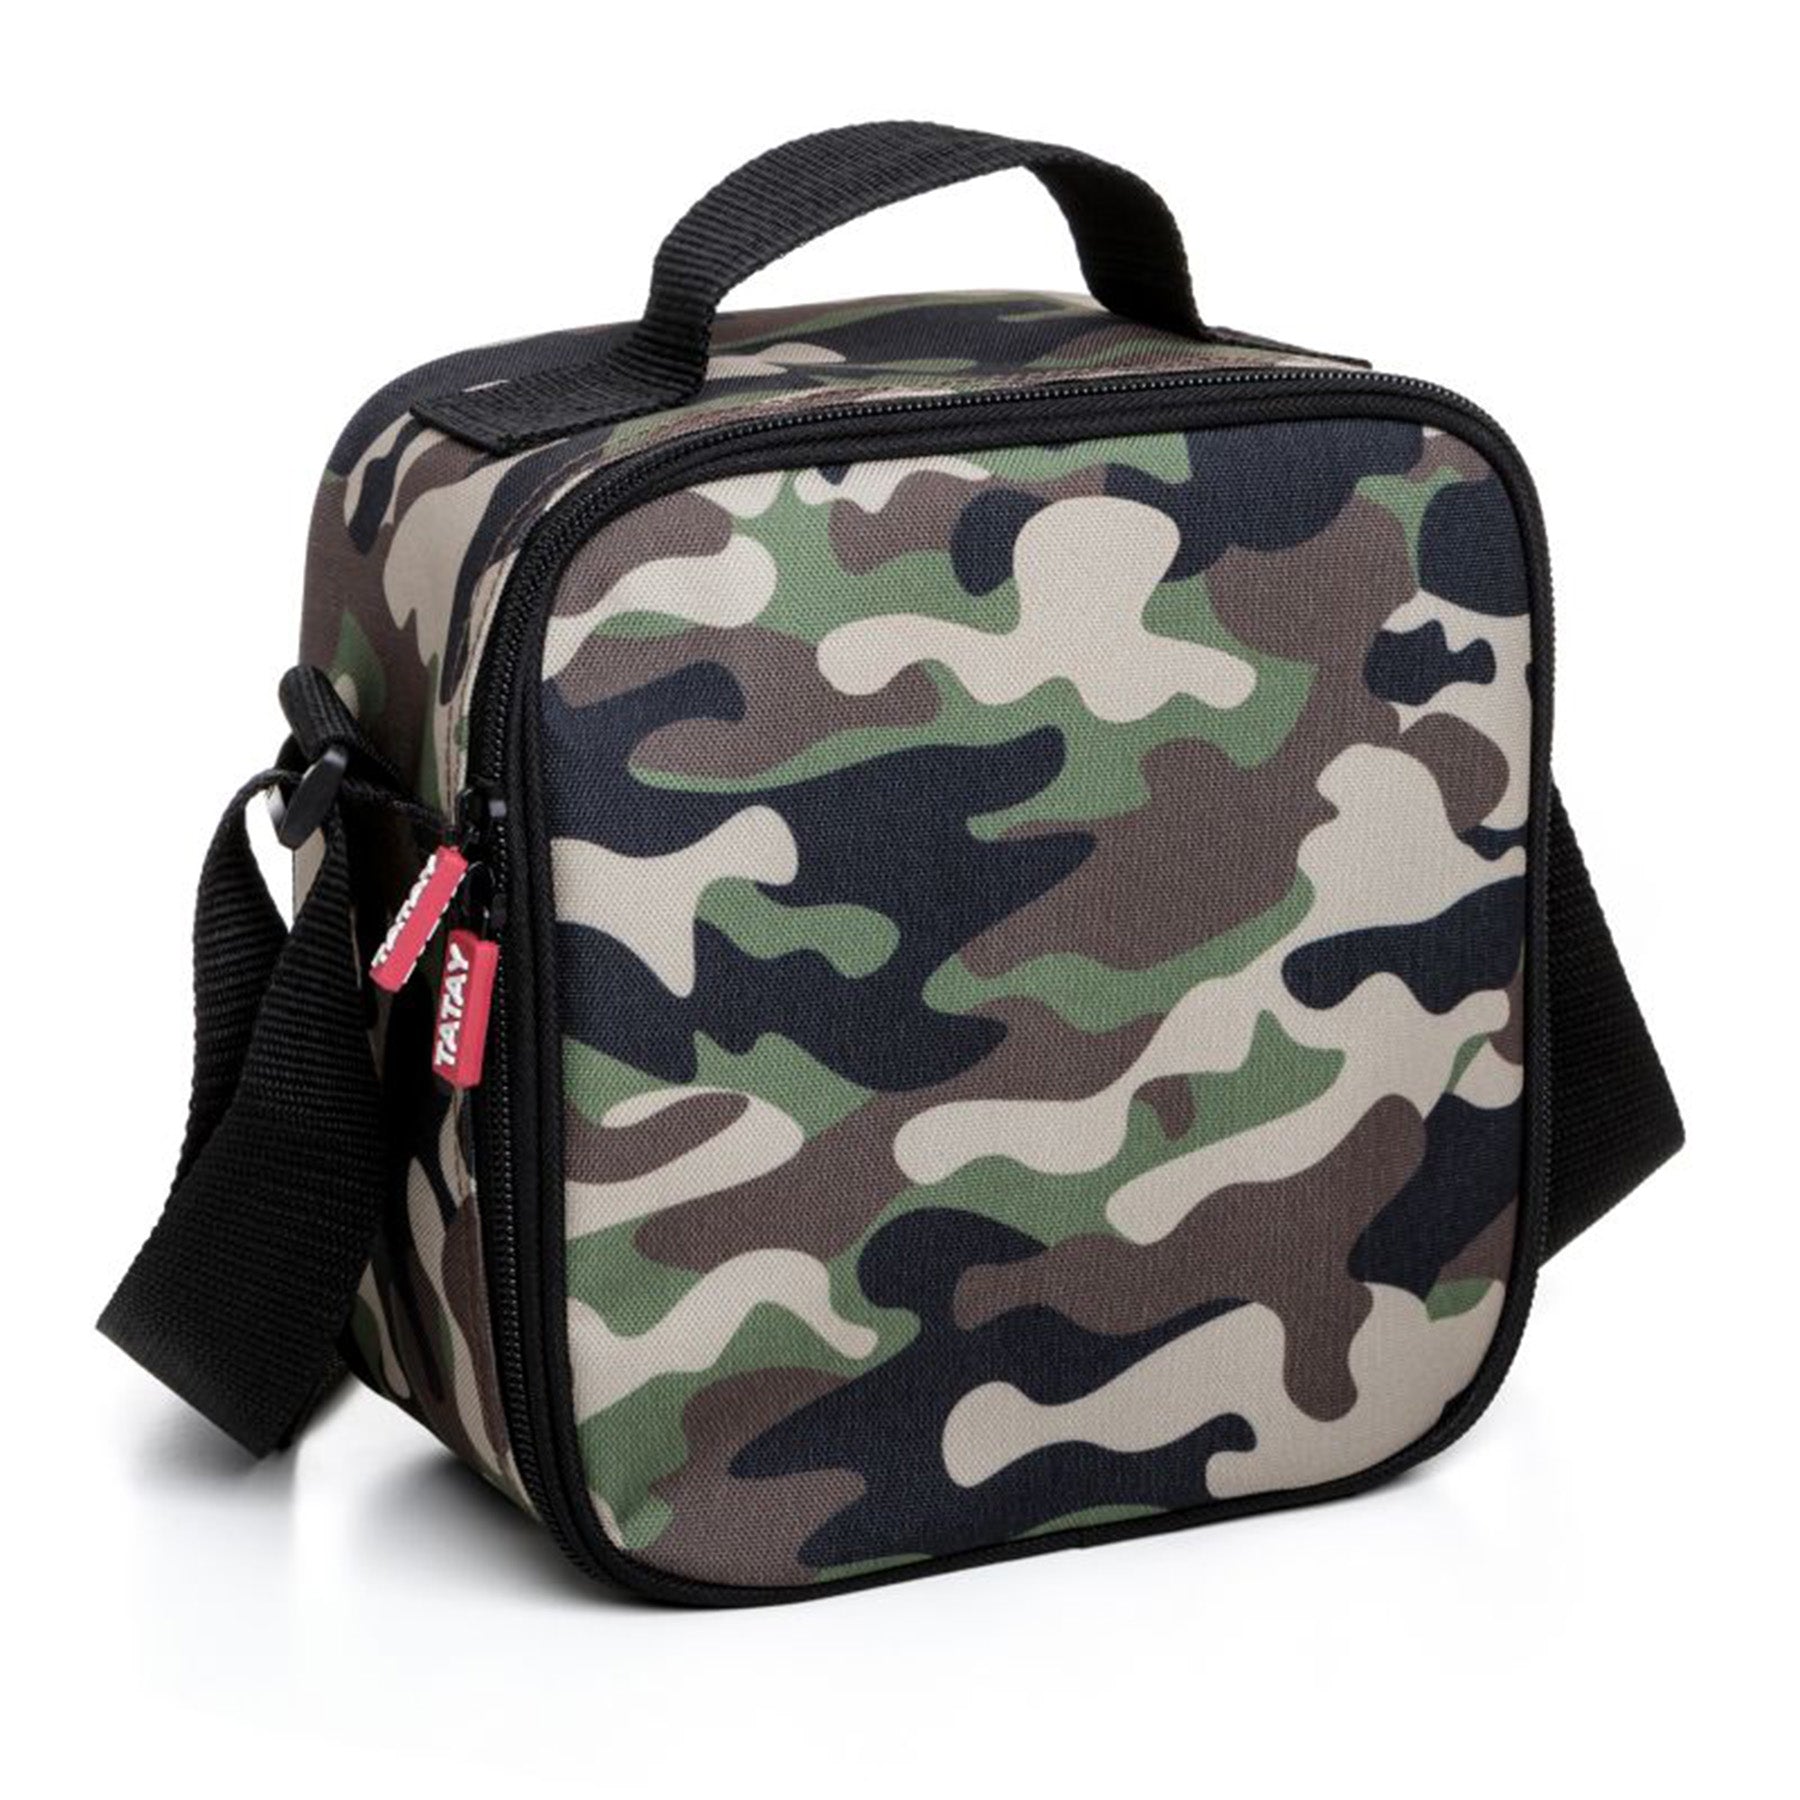 URBAN FOOD CASUAL SRP 3 - CAMOUFLAGE